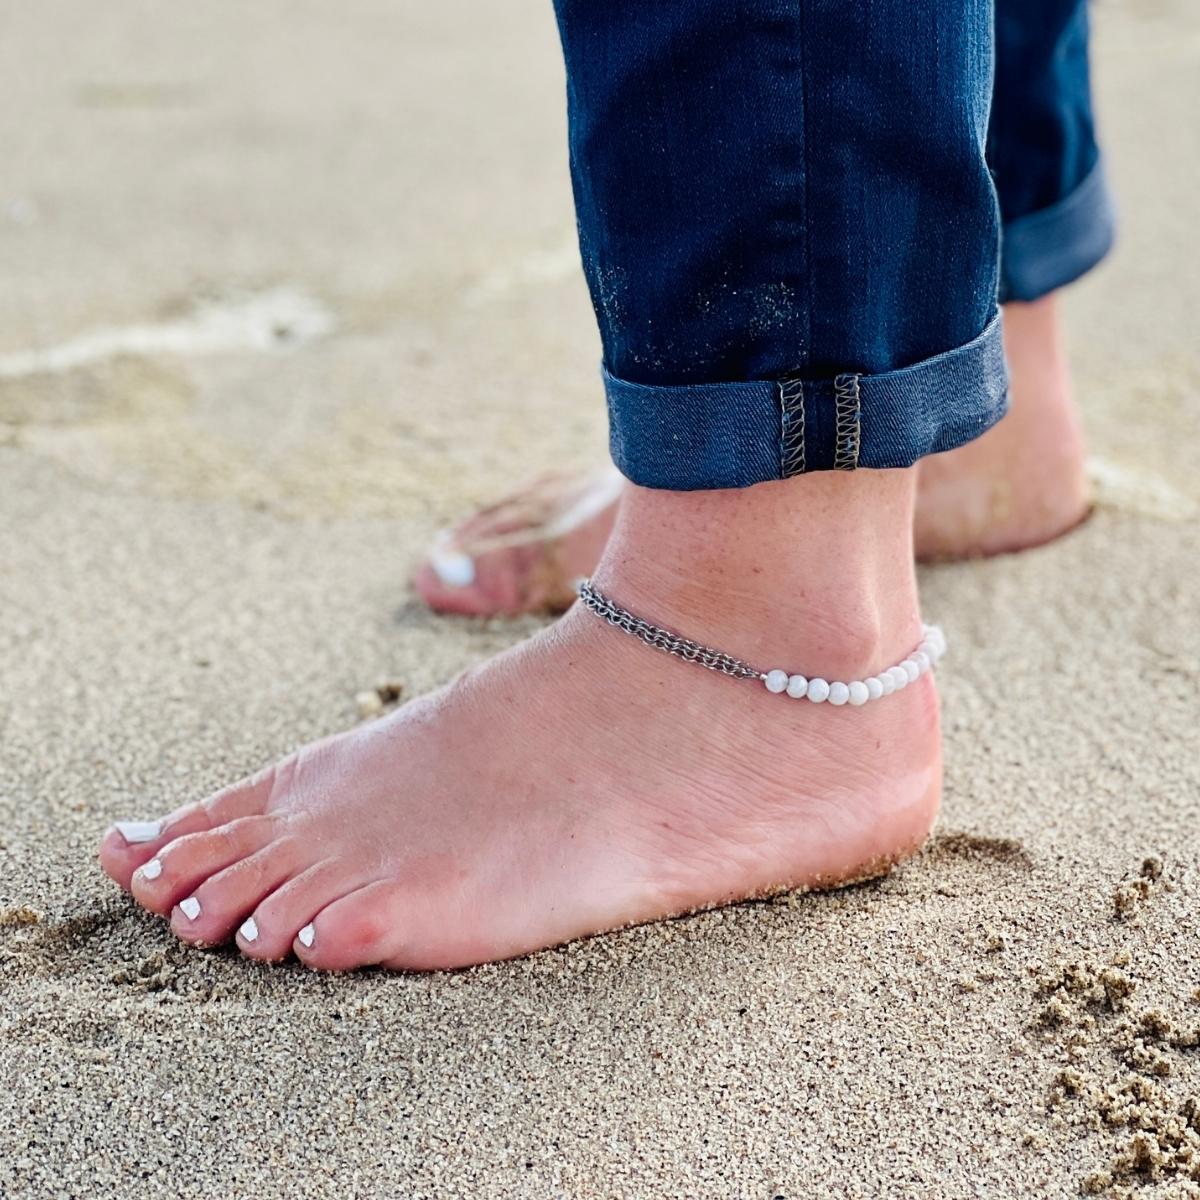 Neptunic SharkSuit Anklet - Sustainable Fashion for Ocean Lovers. People of the Water is dedicated to changing people's relationship with our aquatic world through Exploration, Education, and Conservation. Portions of the sale of this jewelry supports the People of the Water Non-Profit.